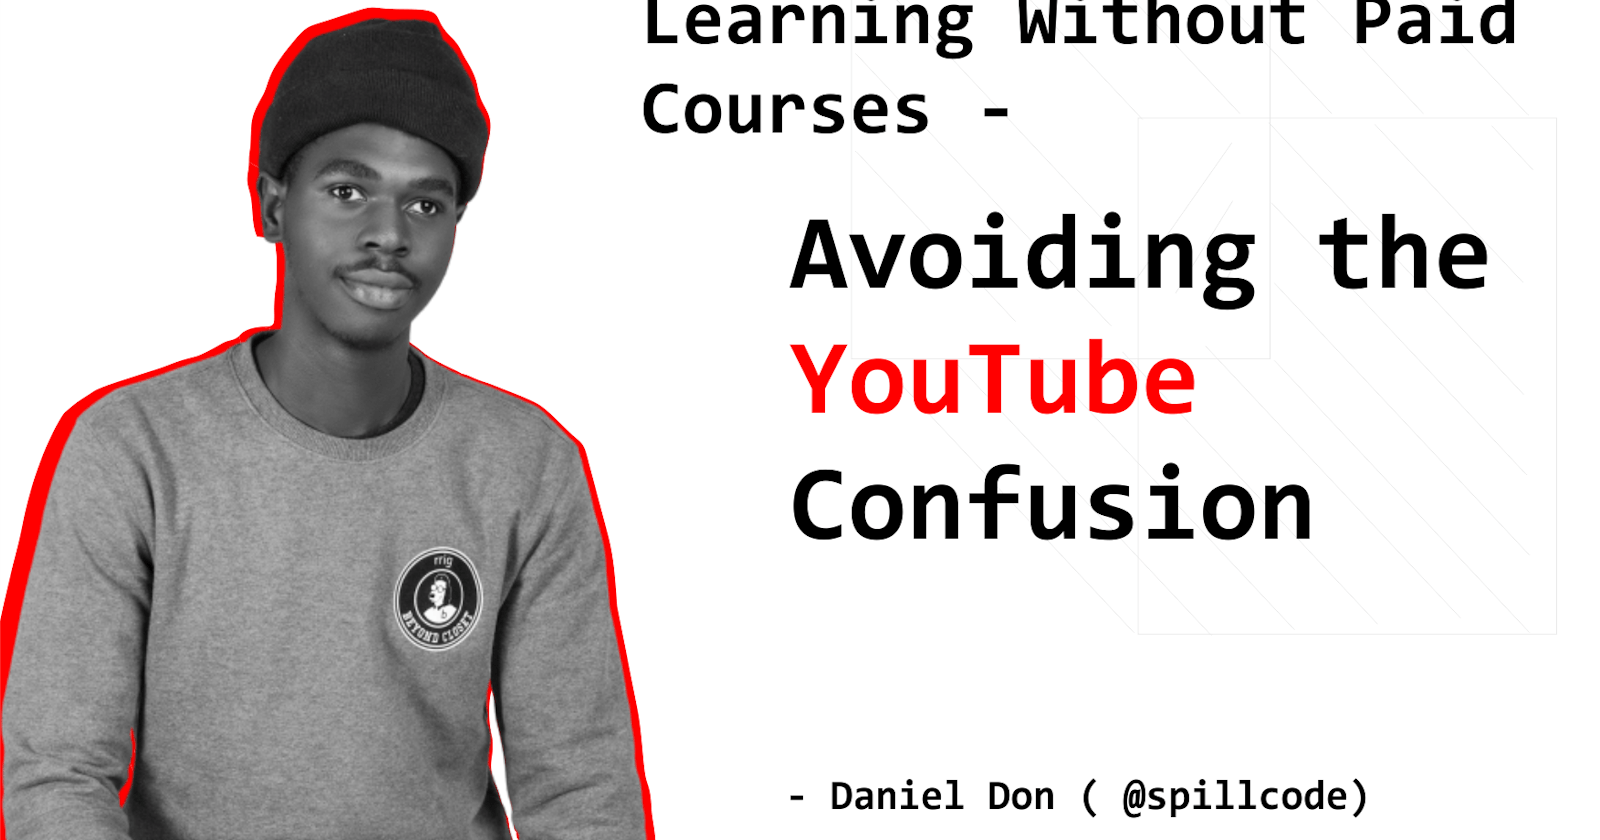 Learning Without Paid Courses - Avoiding the YouTube Confusion